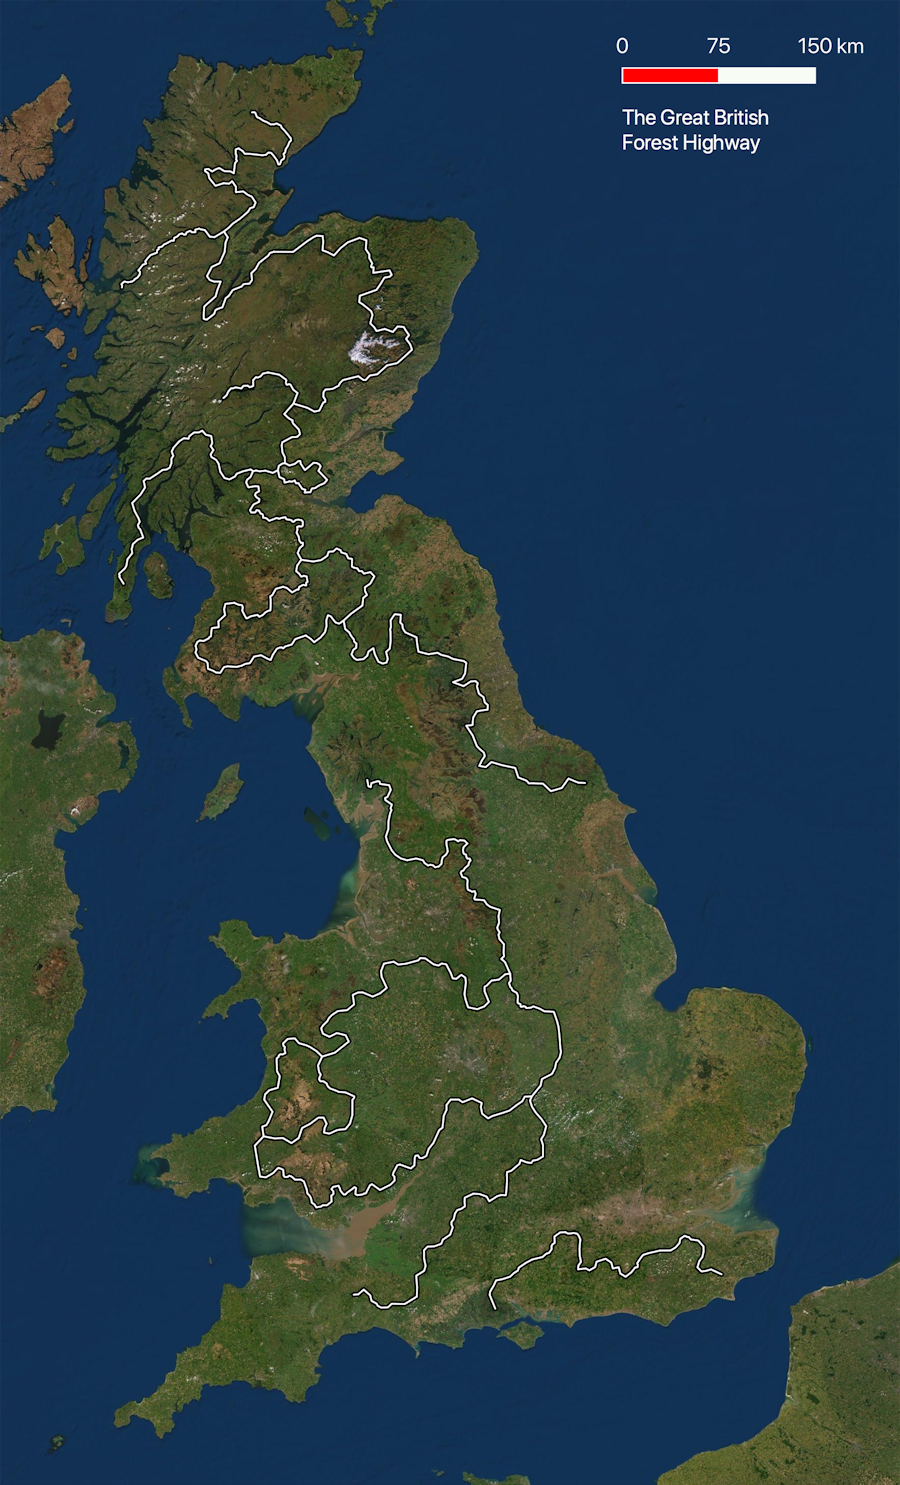 A satellite map of Great Britain, with a proposed path for the Forest
Highway layered on top.